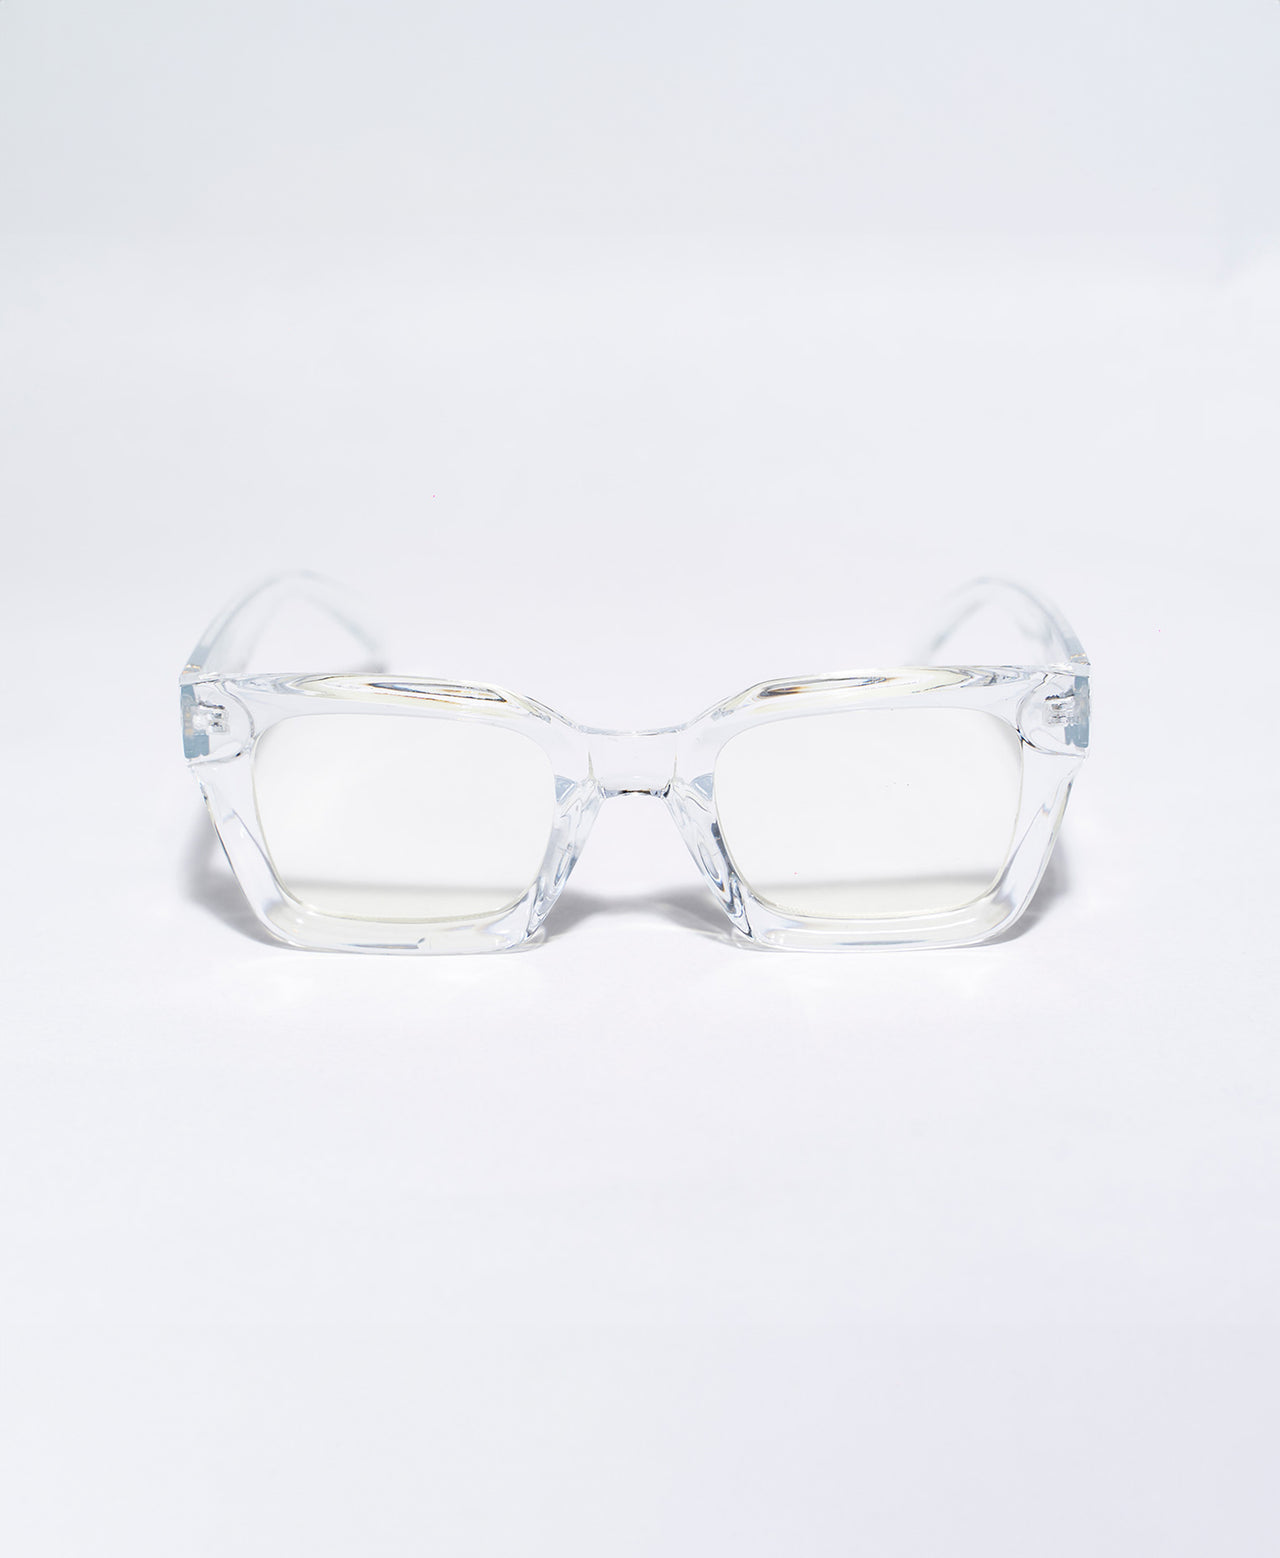 SUNGLASSES "SQUARE" TYPE A CLEAR WHITE